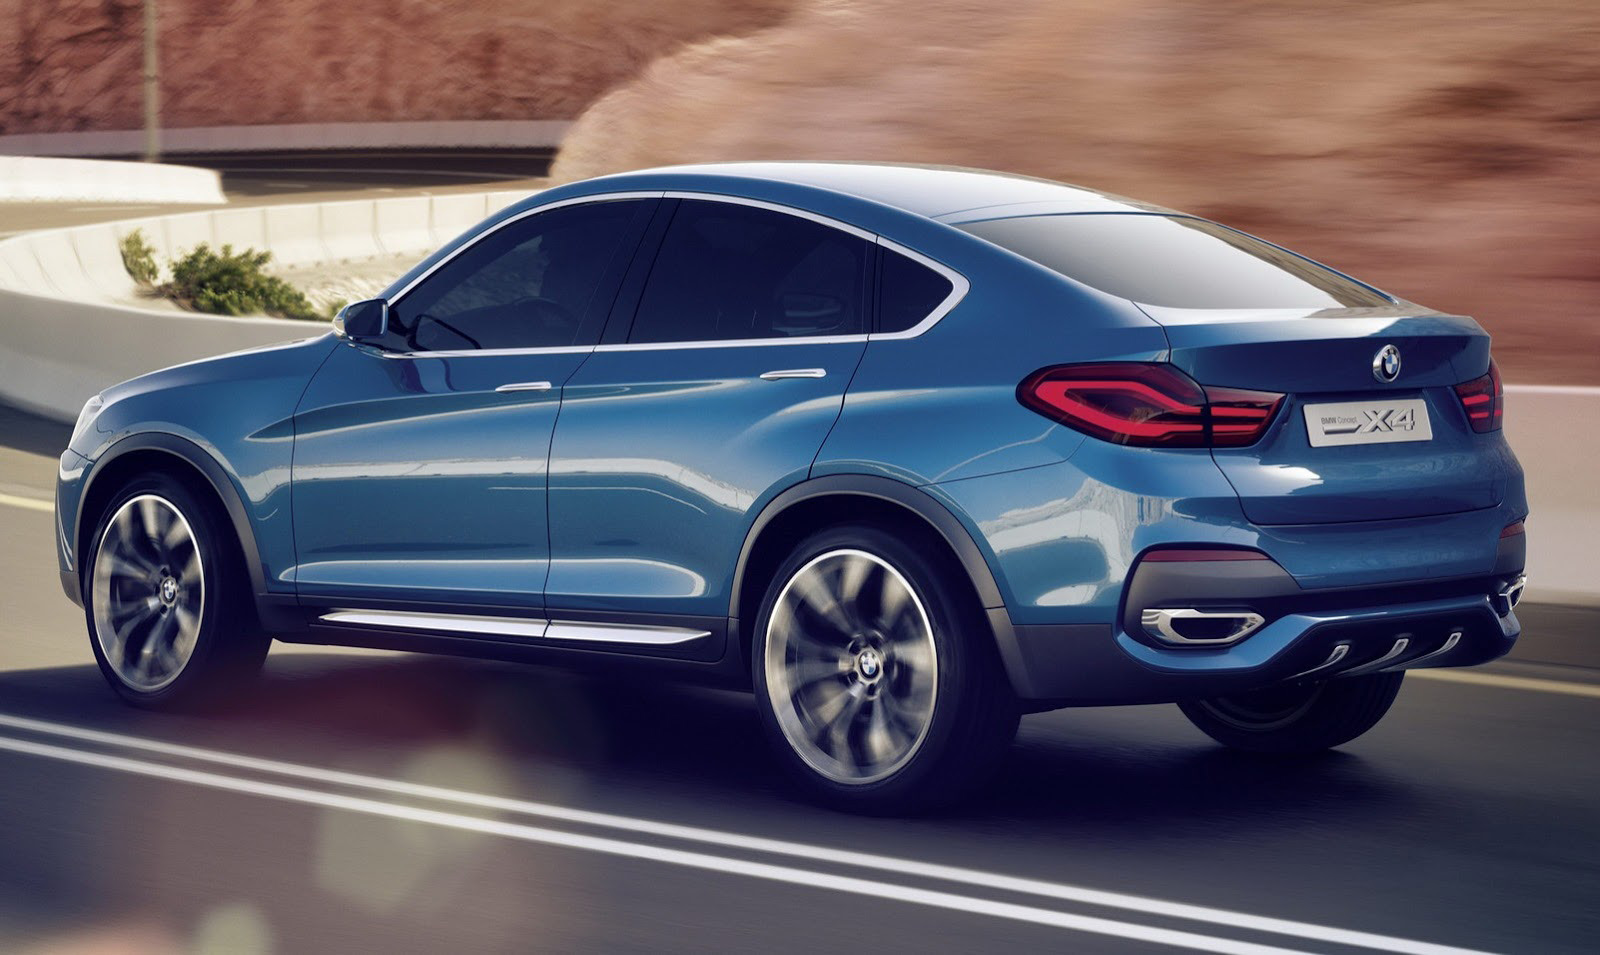 bmw_x4_concept_leaked_08-0418